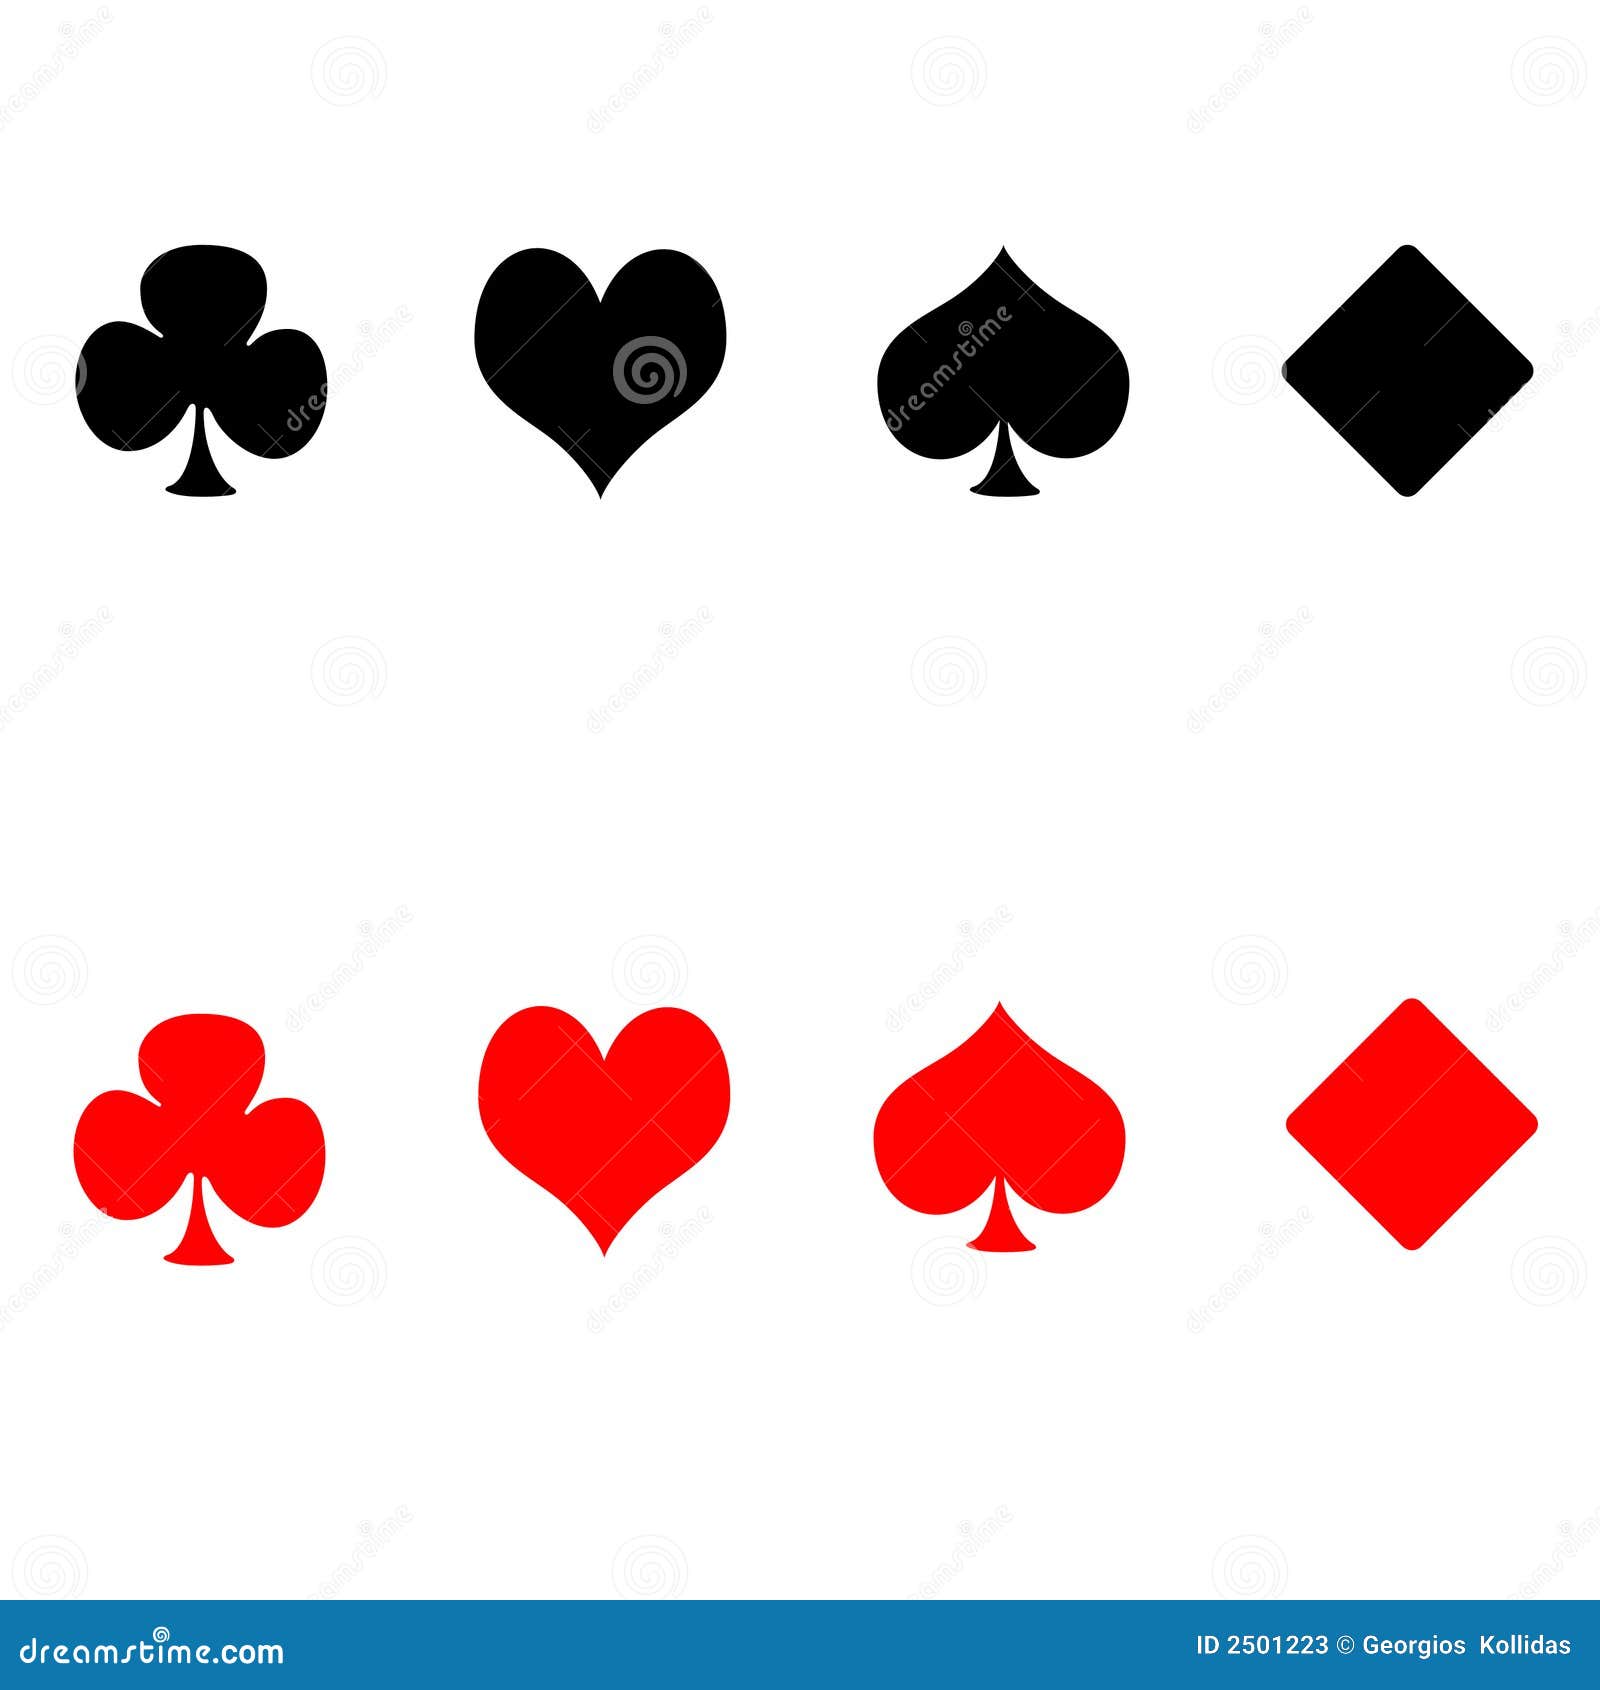 25 [CDR] FREE PRINTABLE PLAYING CARD SUITS DOWNLOAD ZIP PRINTABLE